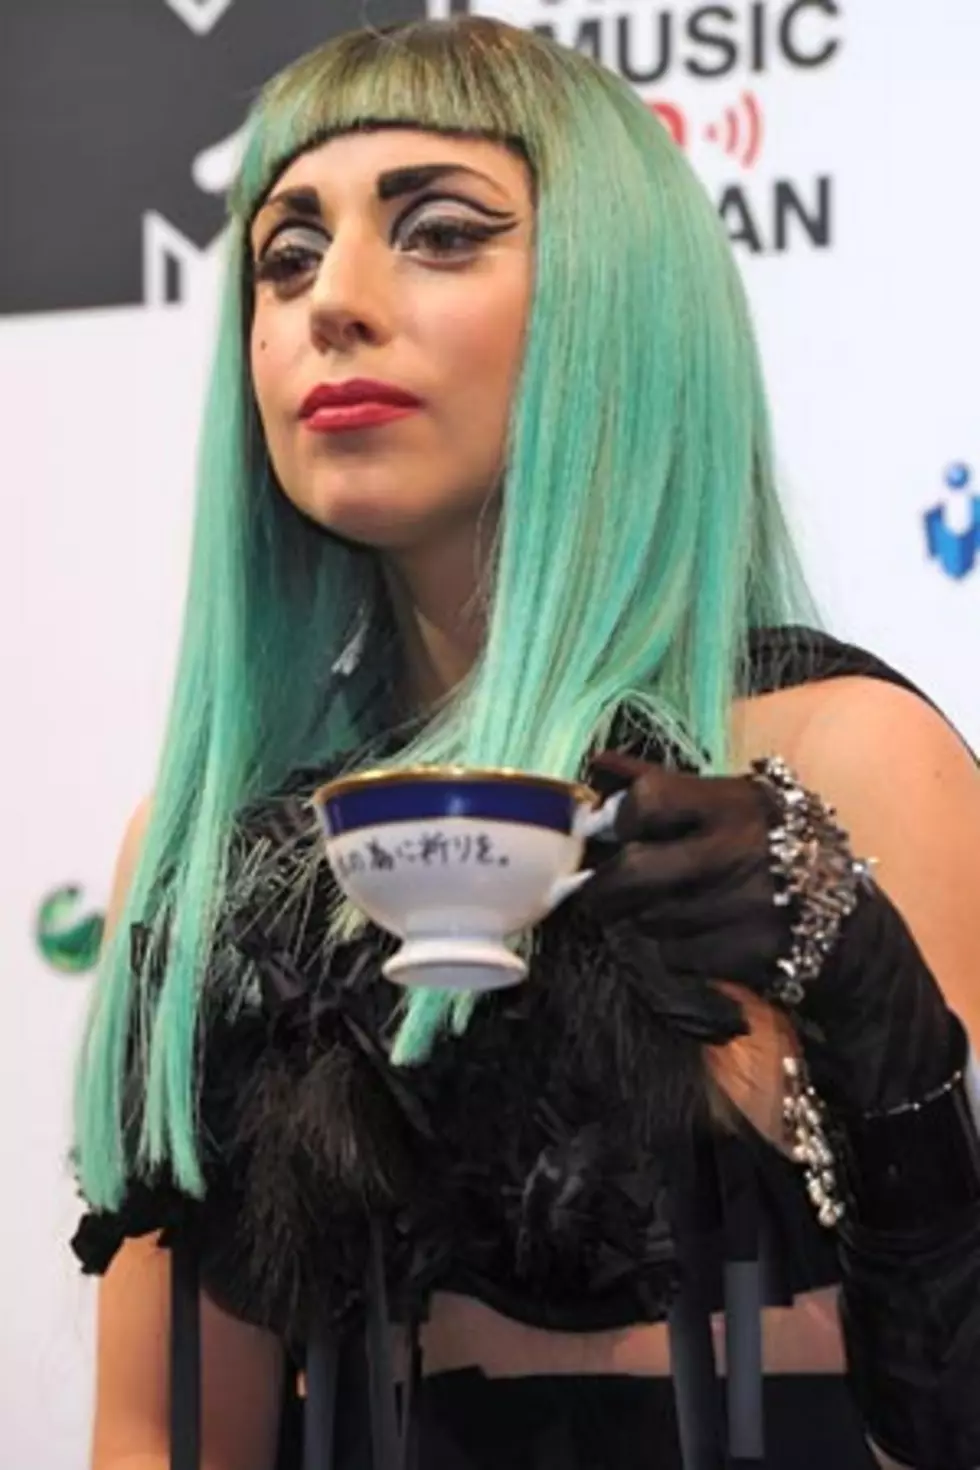 Lady Gaga Teacup Auctioned for $75,000